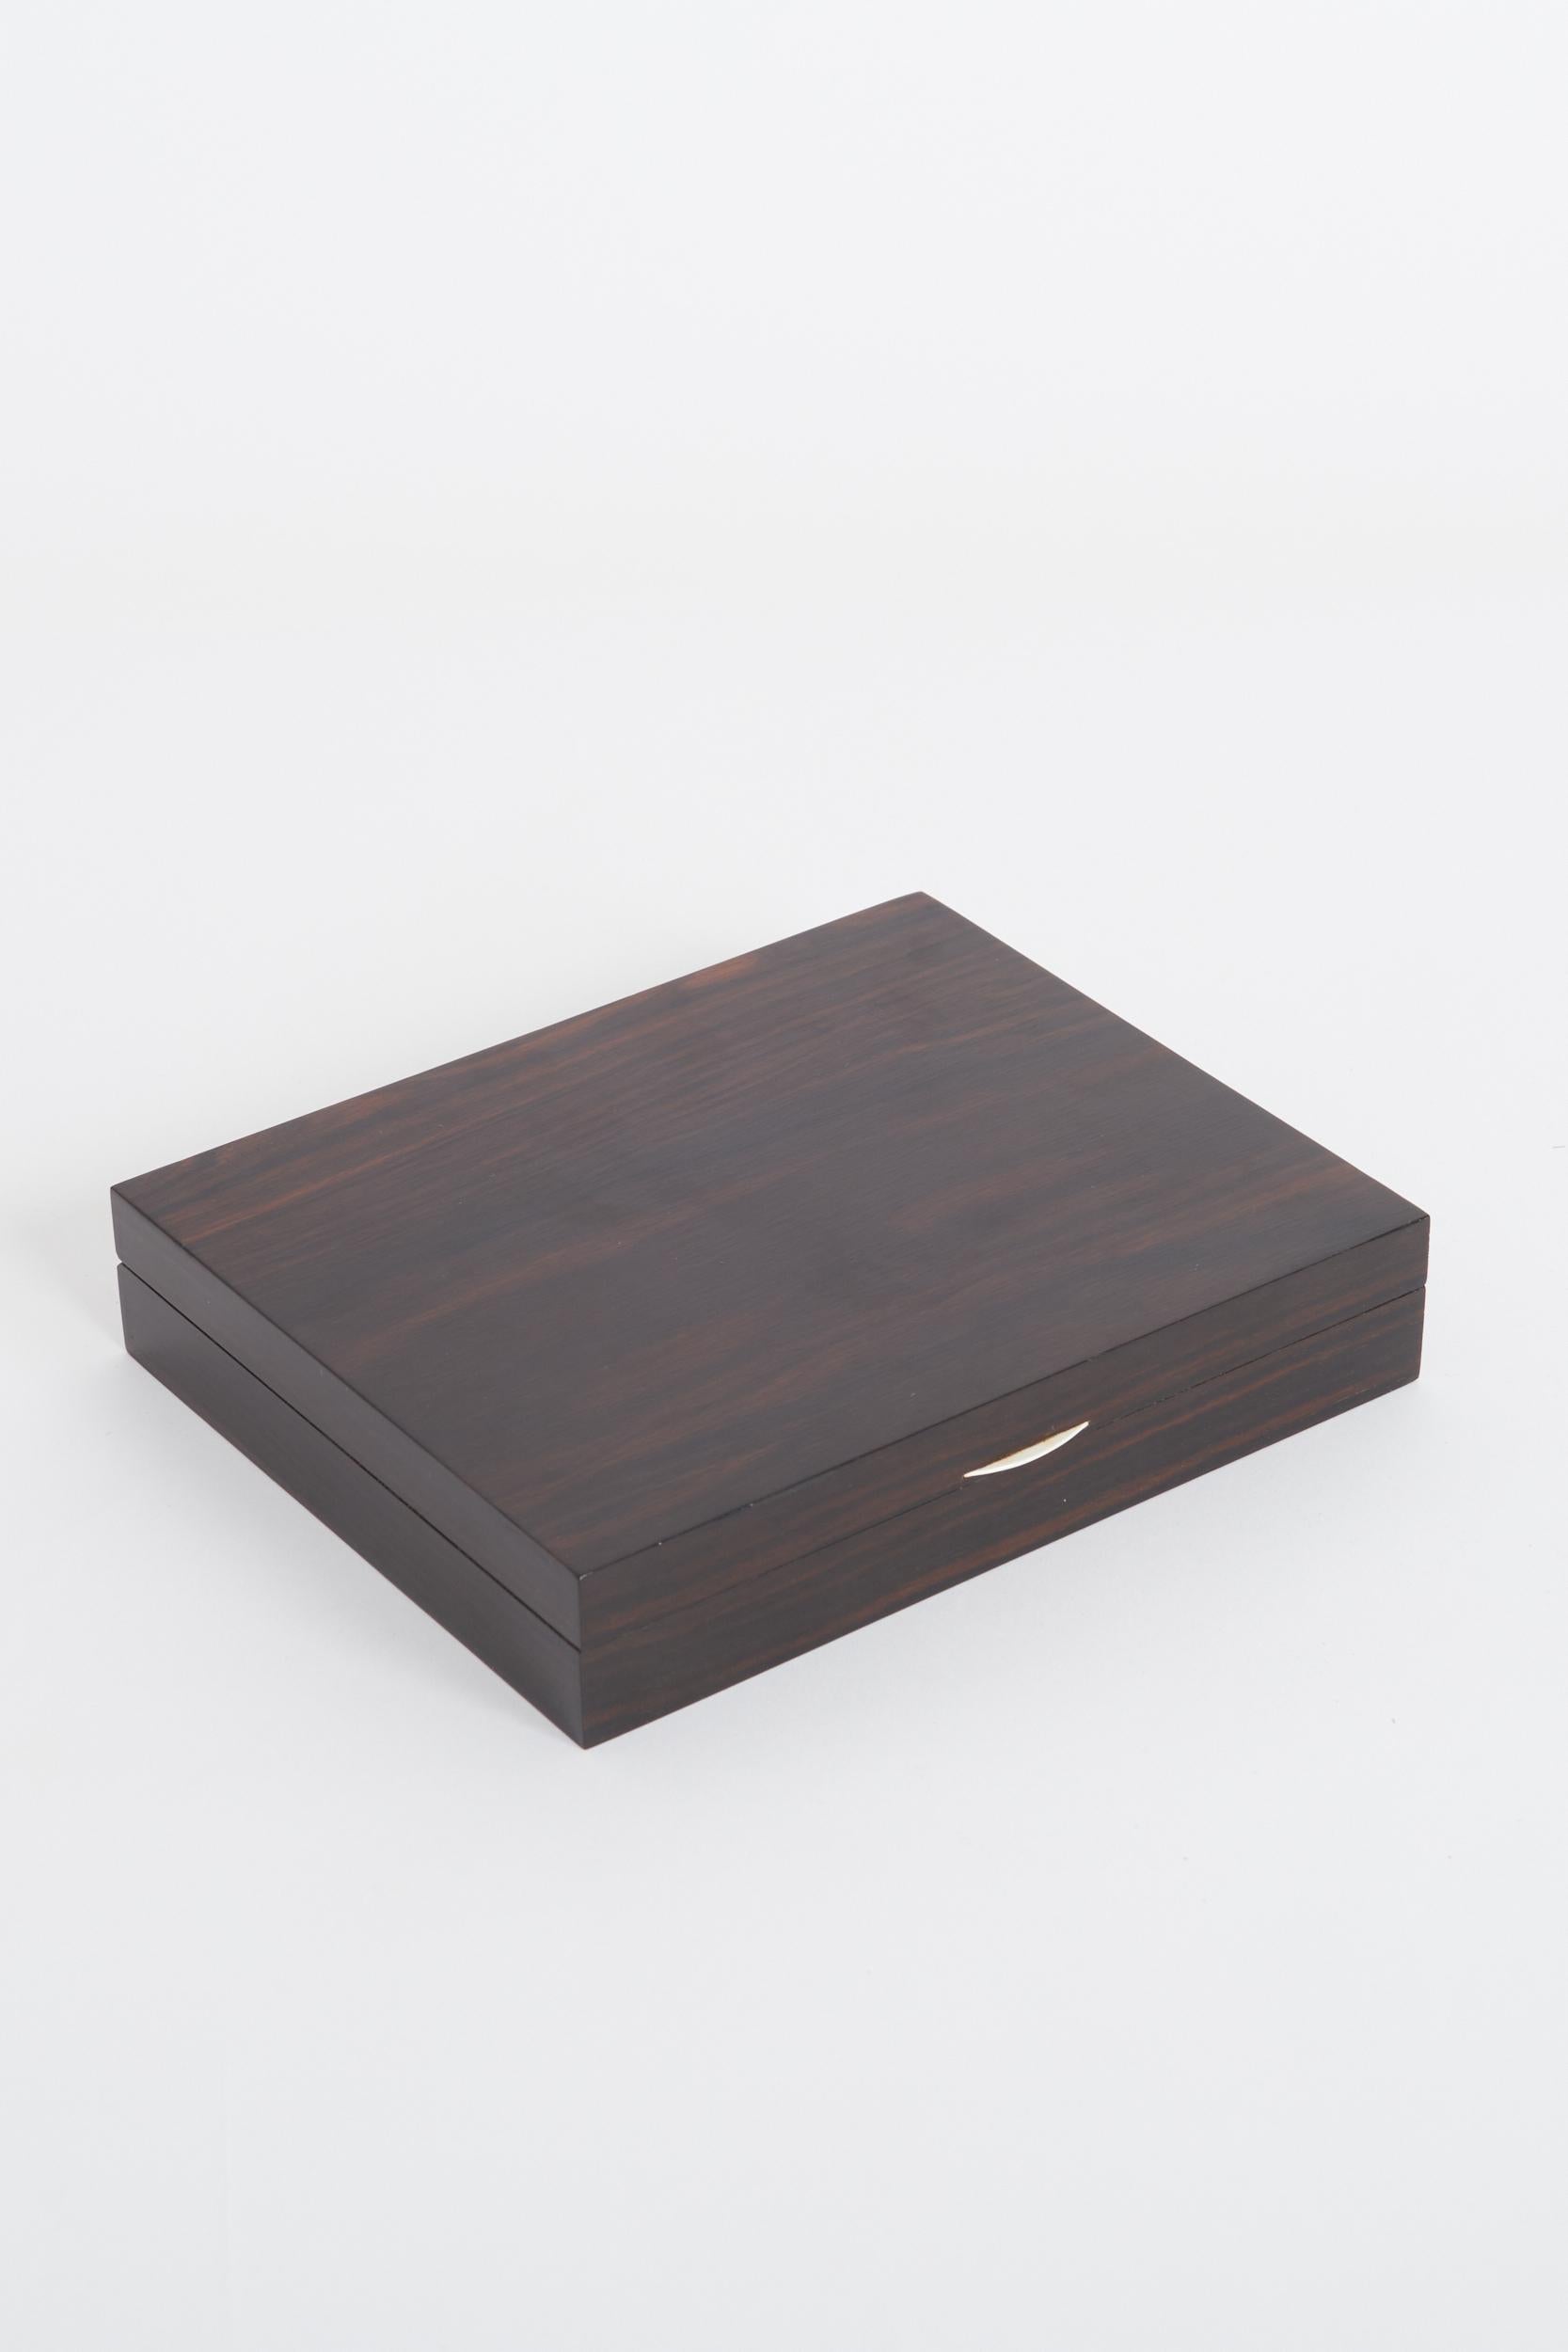 An Art Deco rosewood box, with a bone pull. 
France, 1930s
3.5 cm high by 18.5 cm wide by 15 cm depth.